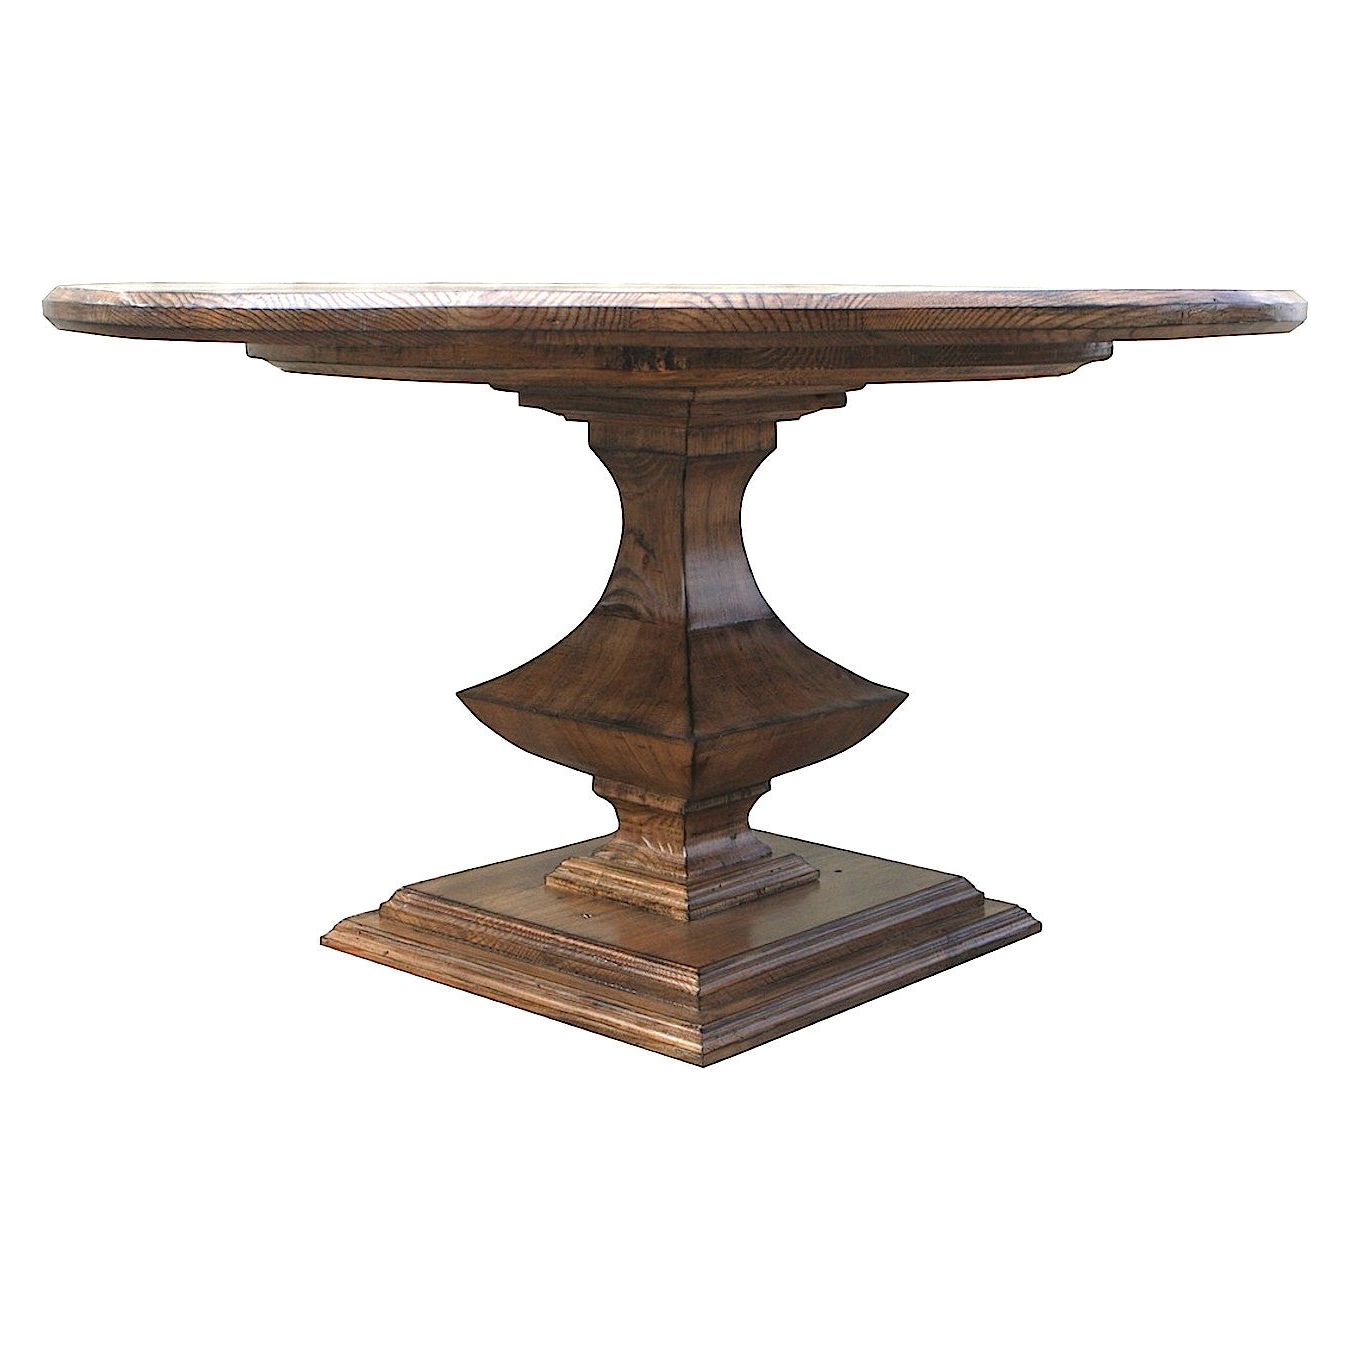 Algonquin Round Pedestal Dining Table in Reclaimed Wood – Mortise & Tenon